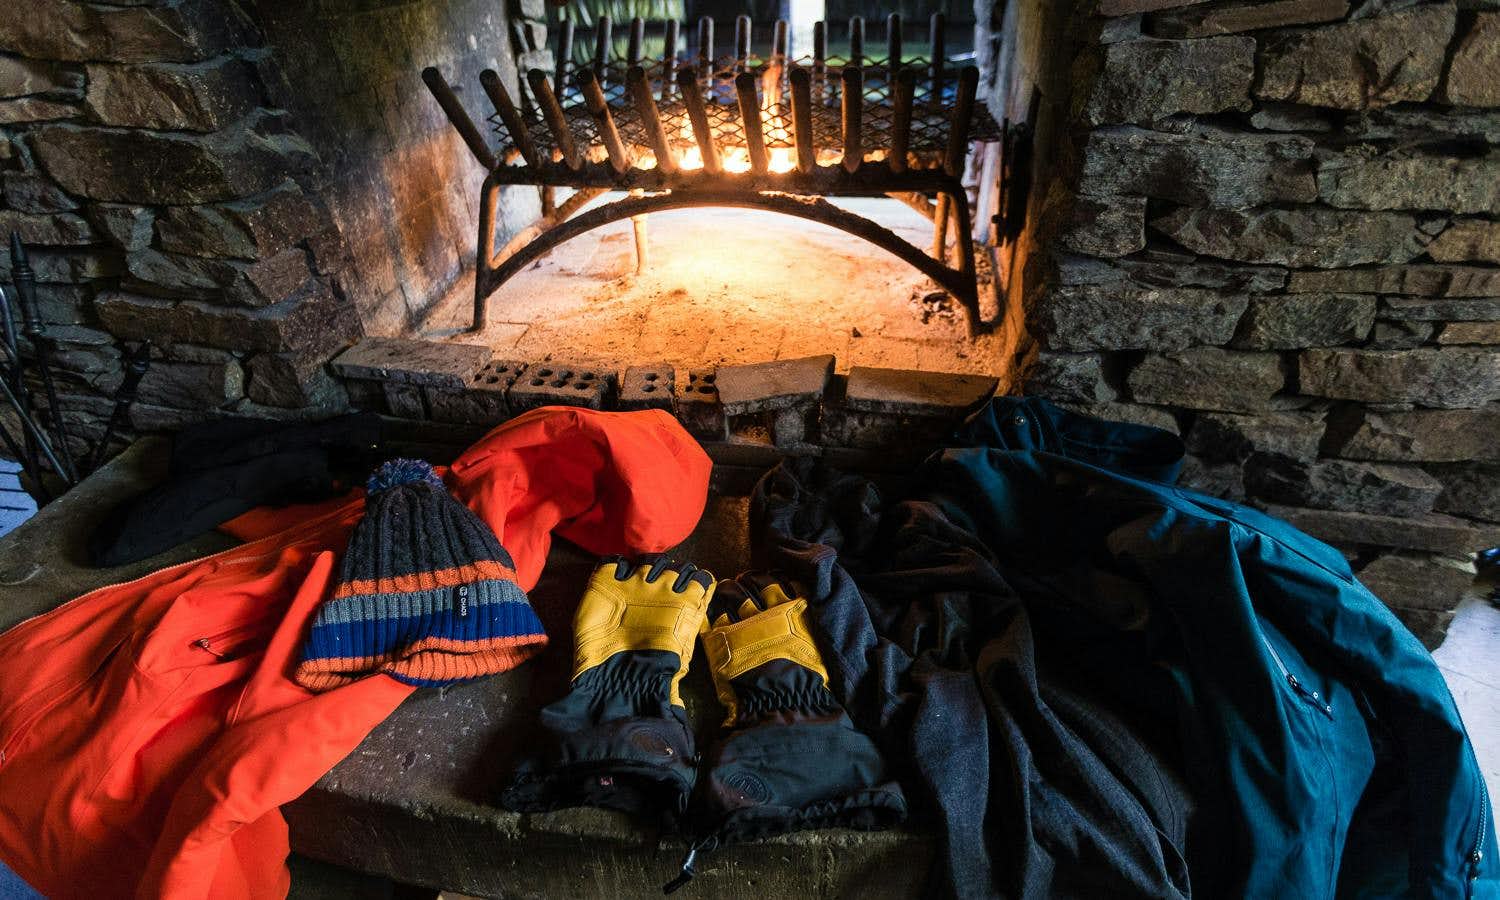 Drying out ski jackets by the fire